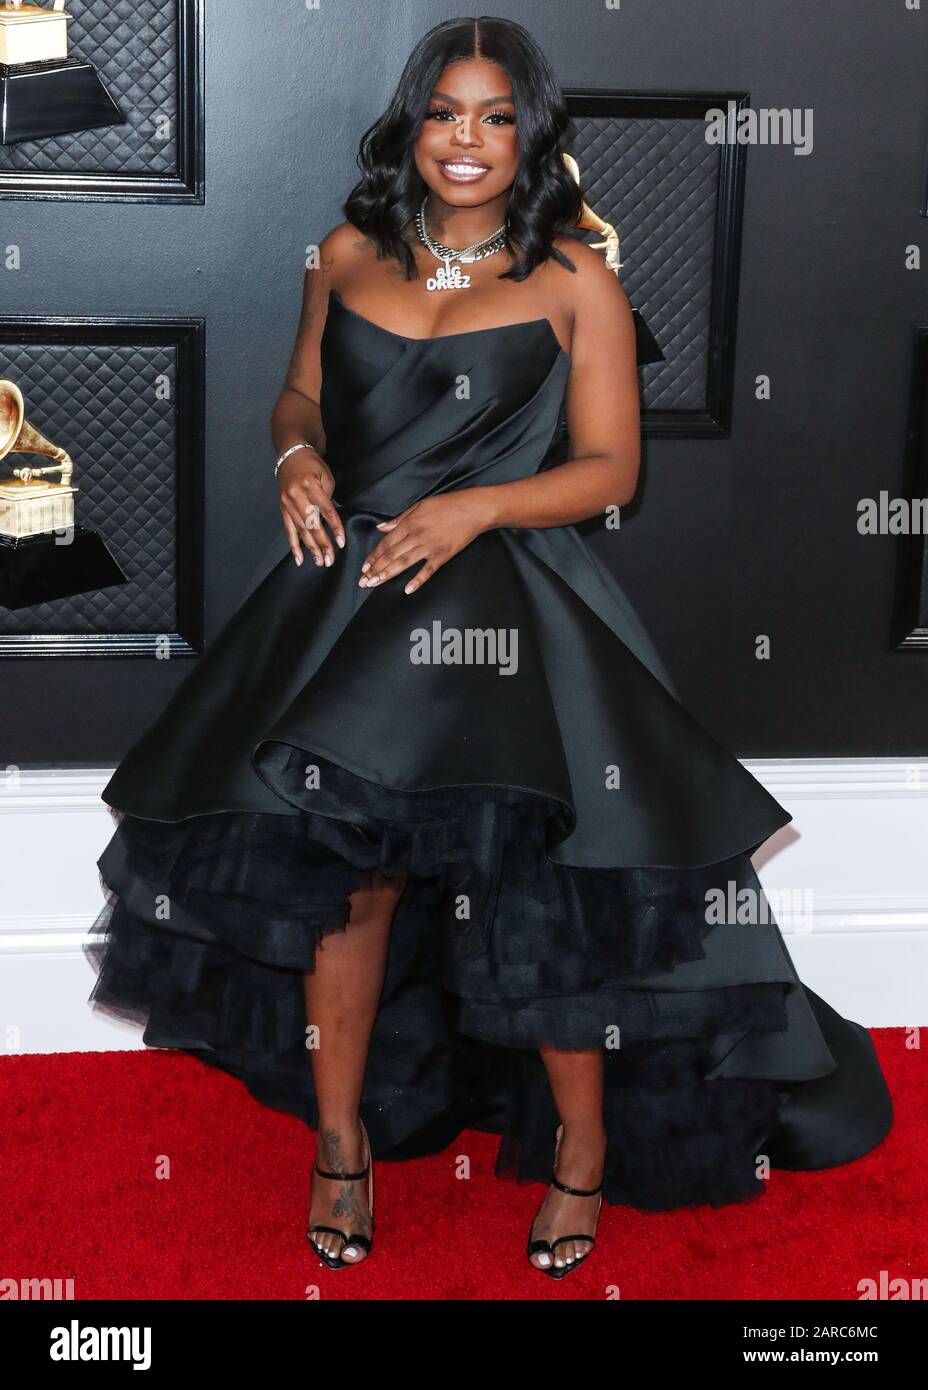 LOS ANGELES, CALIFORNIA, USA - JANUARY 26: Dreezy arrives at the 62nd Annual GRAMMY Awards held at Staples Center on January 26, 2020 in Los Angeles, California, United States. (Photo by Xavier Collin/Image Press Agency) Stock Photo